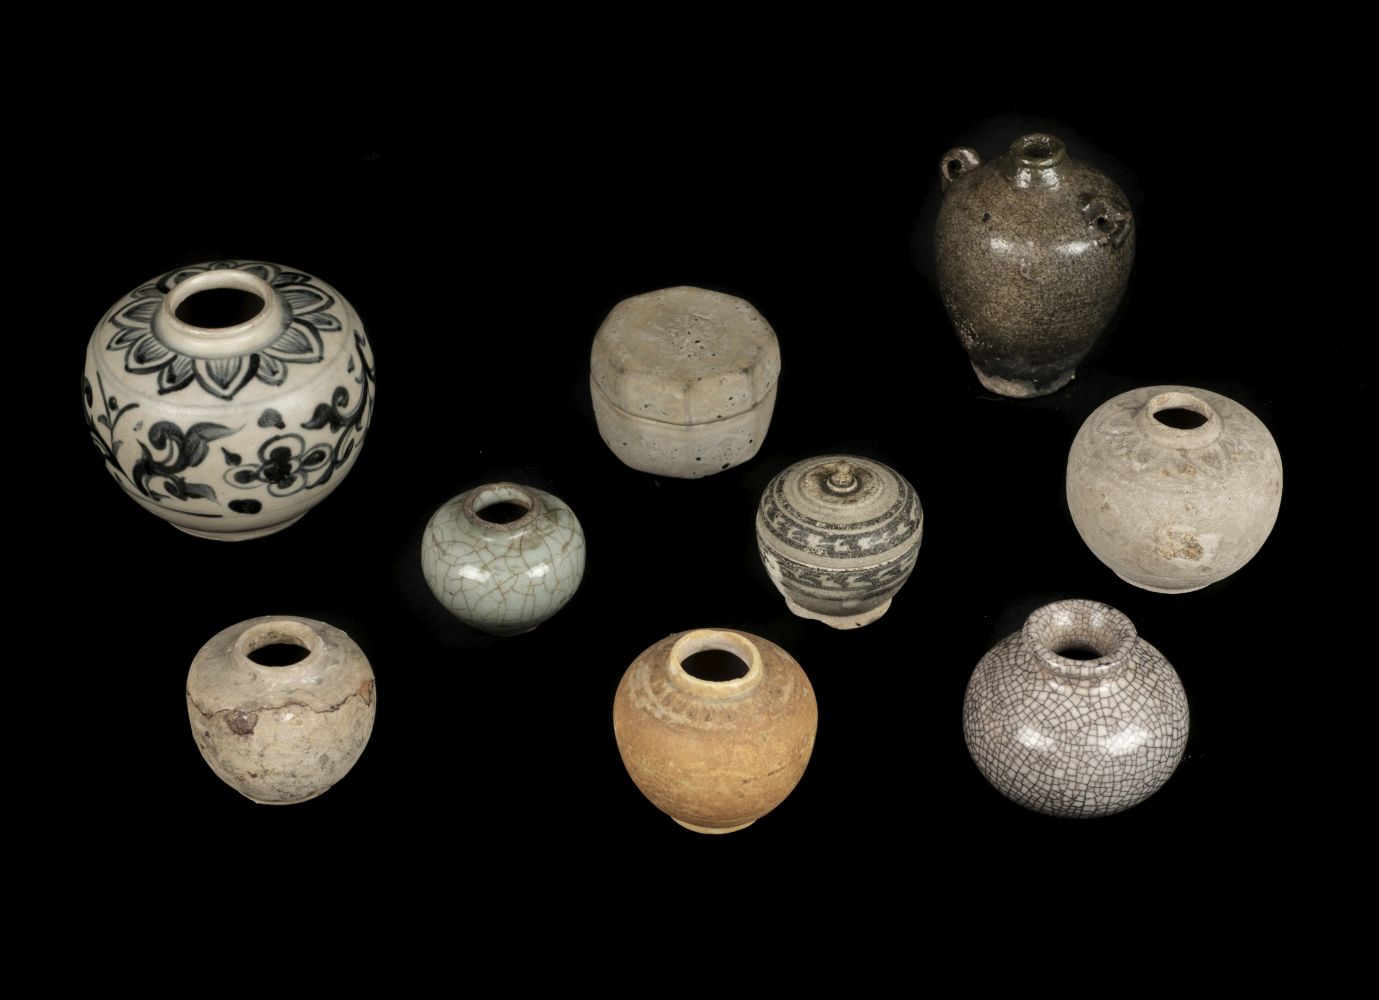 * Chinese Pots. A collection of archaic Chinese miniature pots